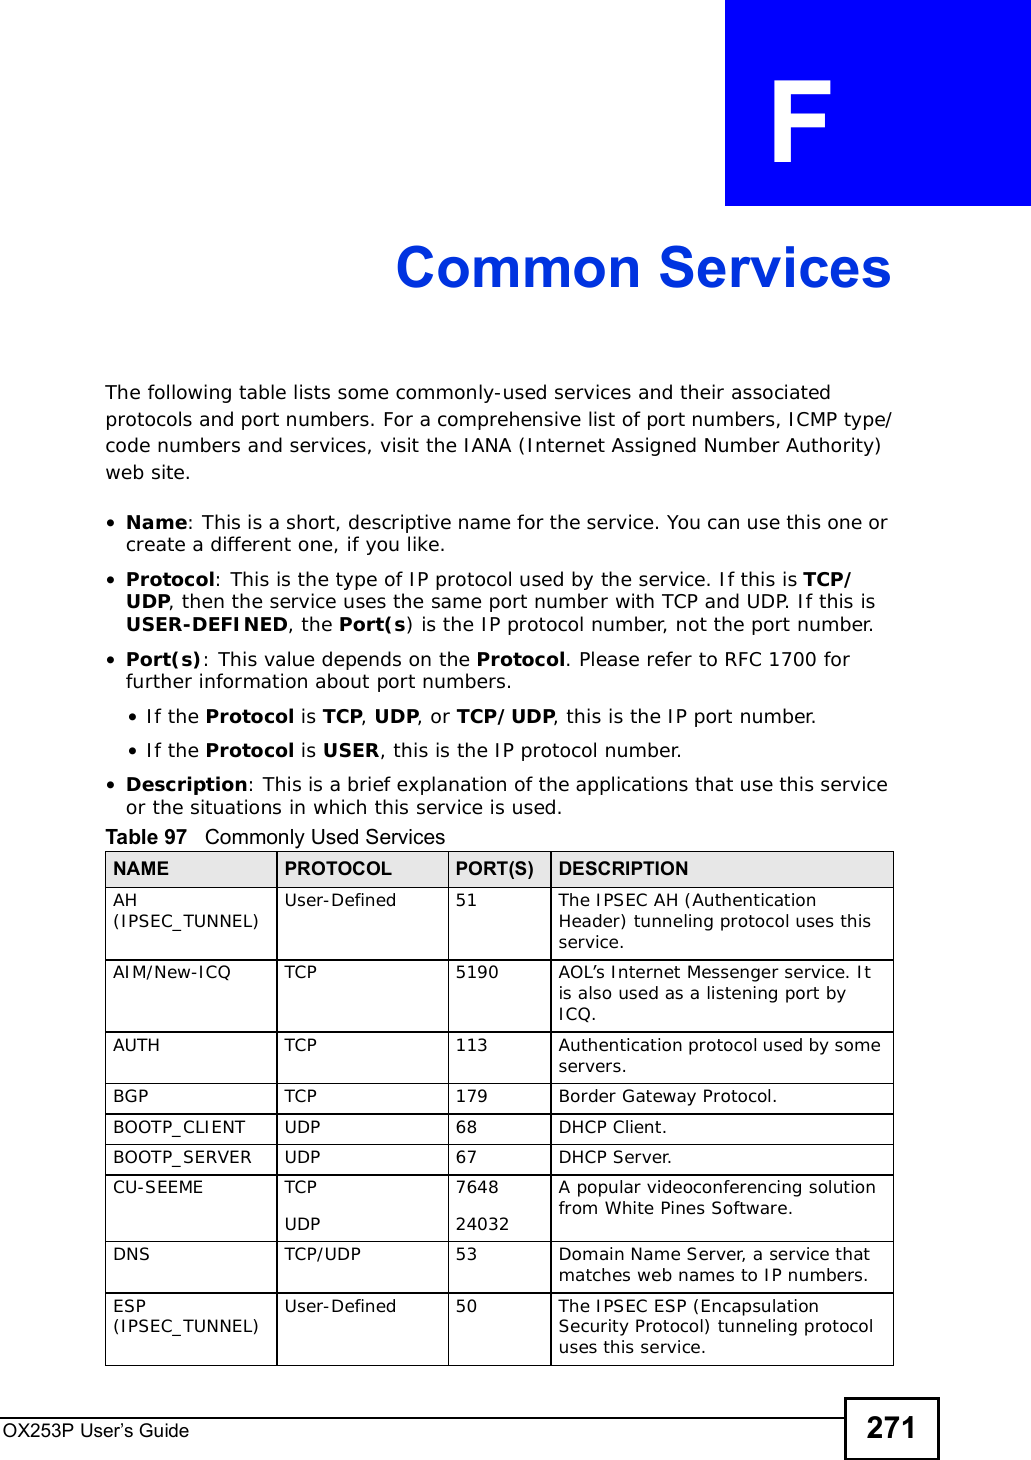 OX253P User’s Guide 271APPENDIX  F Common ServicesThe following table lists some commonly-used services and their associated protocols and port numbers. For a comprehensive list of port numbers, ICMP type/code numbers and services, visit the IANA (Internet Assigned Number Authority) web site. •Name: This is a short, descriptive name for the service. You can use this one or create a different one, if you like.•Protocol: This is the type of IP protocol used by the service. If this is TCP/UDP, then the service uses the same port number with TCP and UDP. If this is USER-DEFINED, the Port(s) is the IP protocol number, not the port number.•Port(s): This value depends on the Protocol. Please refer to RFC 1700 for further information about port numbers.•If the Protocol is TCP,UDP, or TCP/UDP, this is the IP port number.•If the Protocol is USER, this is the IP protocol number.•Description: This is a brief explanation of the applications that use this service or the situations in which this service is used.Table 97   Commonly Used ServicesNAME PROTOCOL PORT(S) DESCRIPTIONAH(IPSEC_TUNNEL) User-Defined 51 The IPSEC AH (Authentication Header) tunneling protocol uses this service.AIM/New-ICQ TCP 5190 AOL’s Internet Messenger service. It is also used as a listening port by ICQ.AUTH TCP 113 Authentication protocol used by some servers.BGP TCP 179 Border Gateway Protocol.BOOTP_CLIENT UDP 68 DHCP Client.BOOTP_SERVER UDP 67 DHCP Server.CU-SEEME TCPUDP764824032A popular videoconferencing solution from White Pines Software.DNS TCP/UDP 53 Domain Name Server, a service that matches web names to IP numbers.ESP (IPSEC_TUNNEL) User-Defined 50 The IPSEC ESP (Encapsulation Security Protocol) tunneling protocol uses this service.